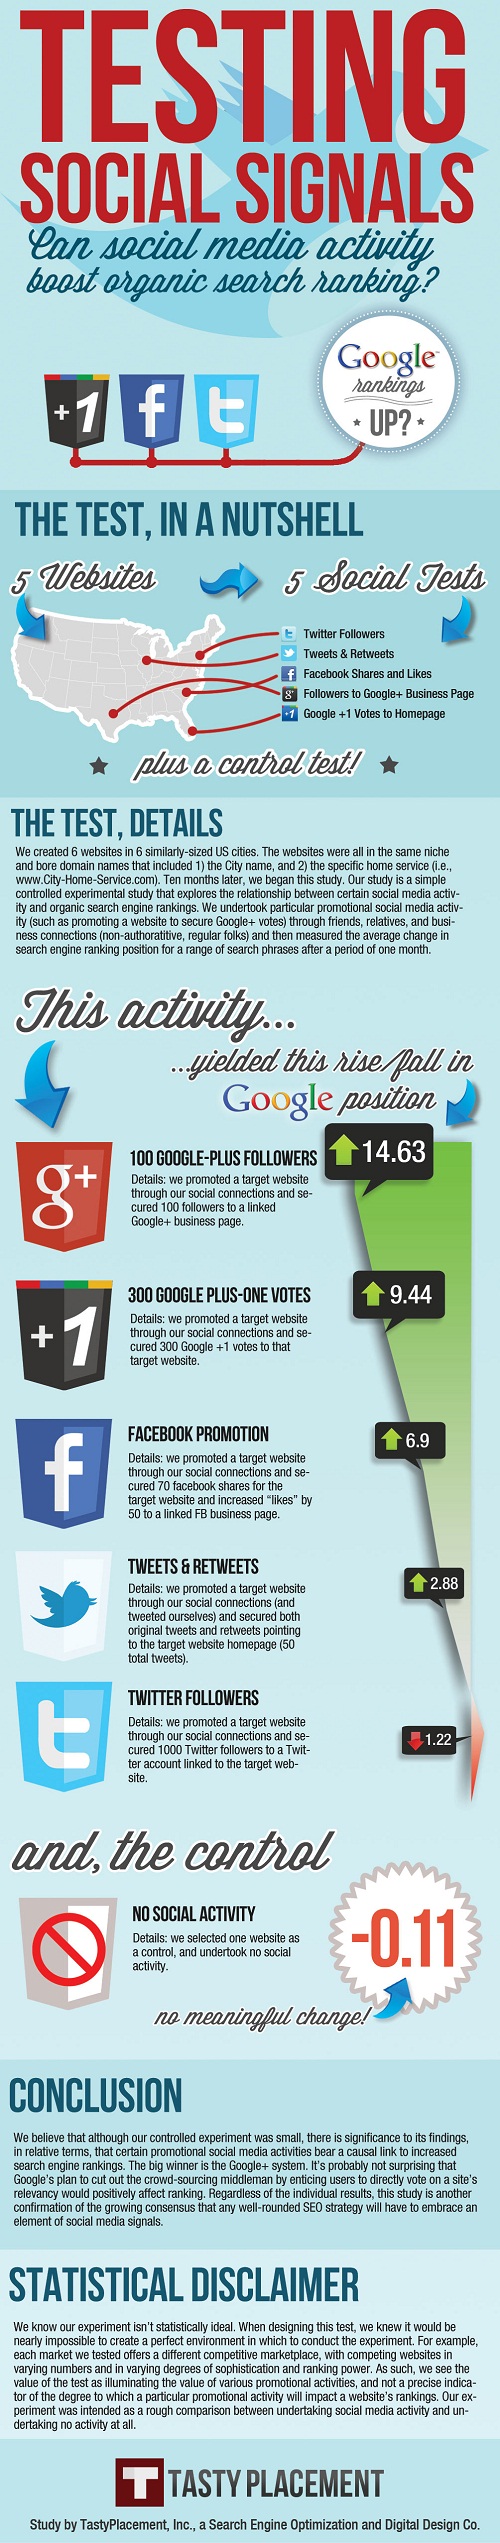 Social Media Affect on Search Rankings Infographic